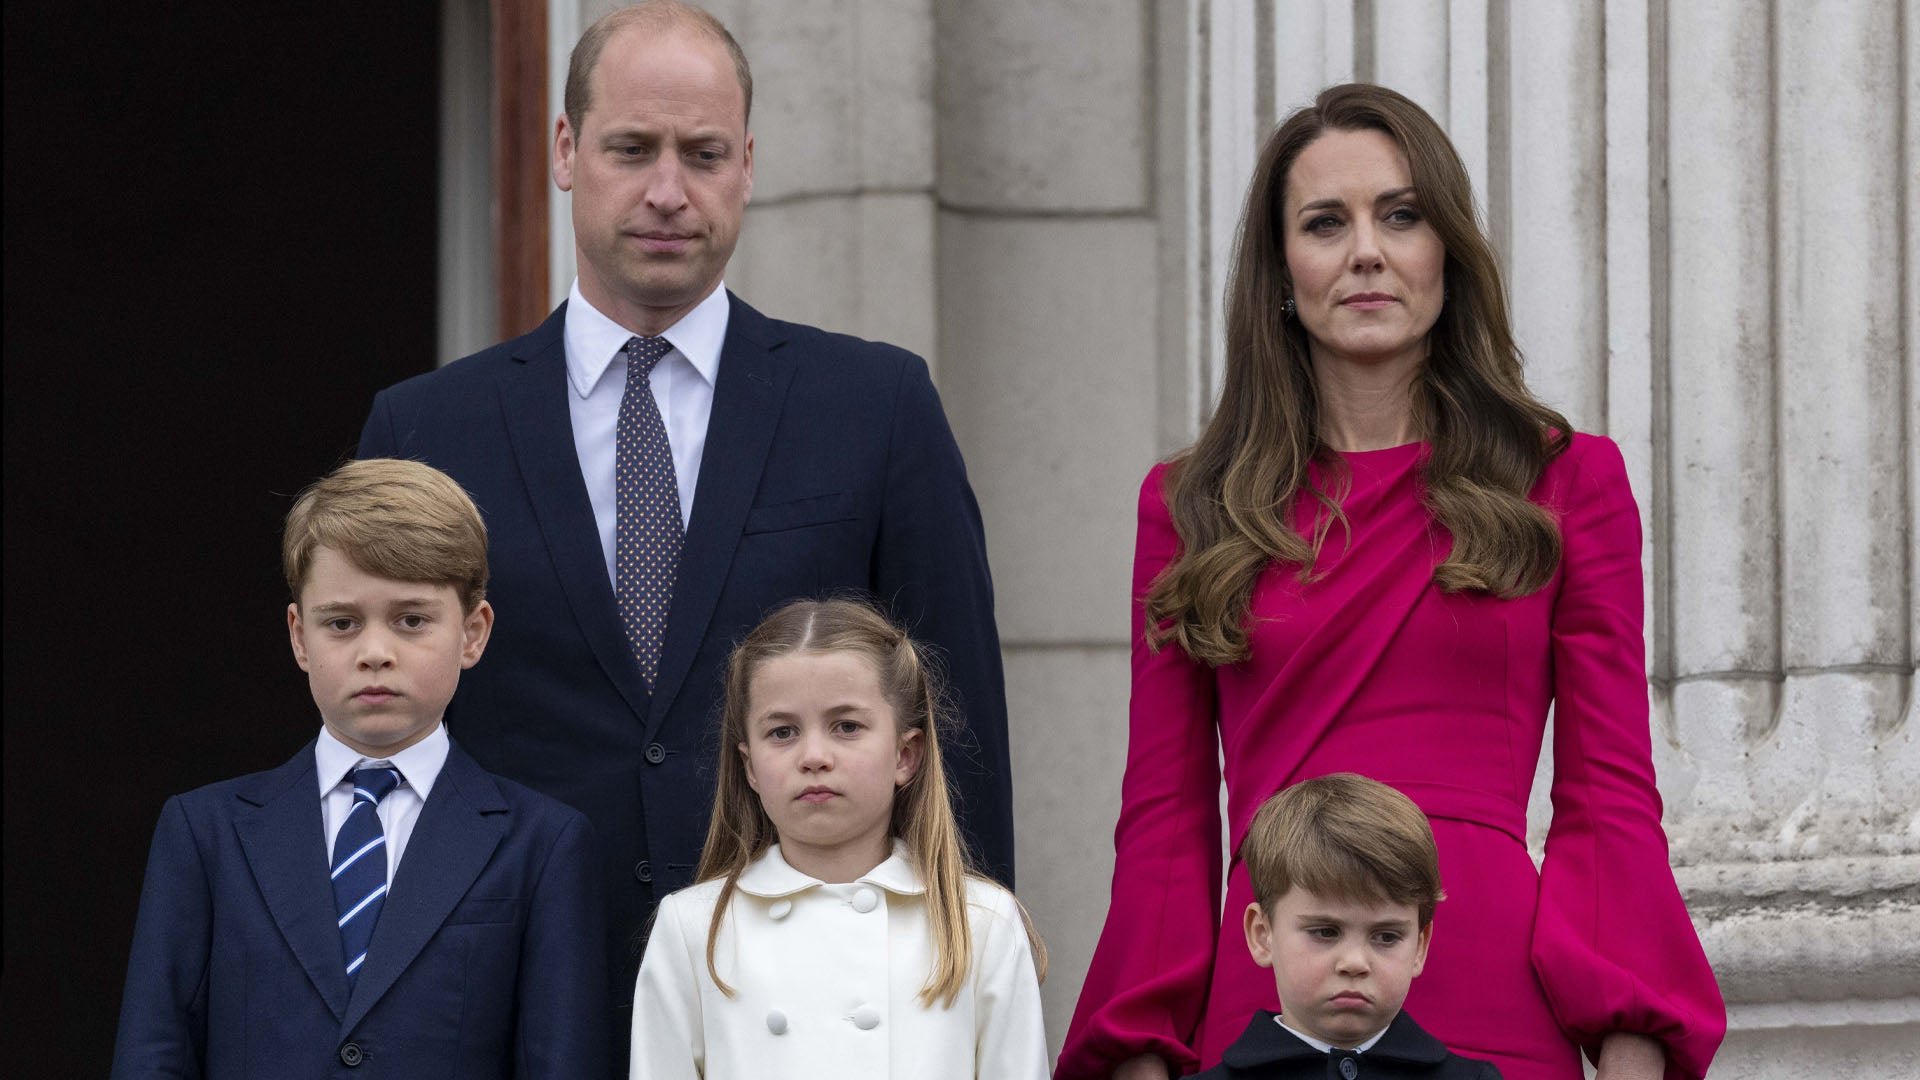 Where Kate Middleton & Prince William Are Spending Easter With Their Kids Amid Cancer Diagnosis